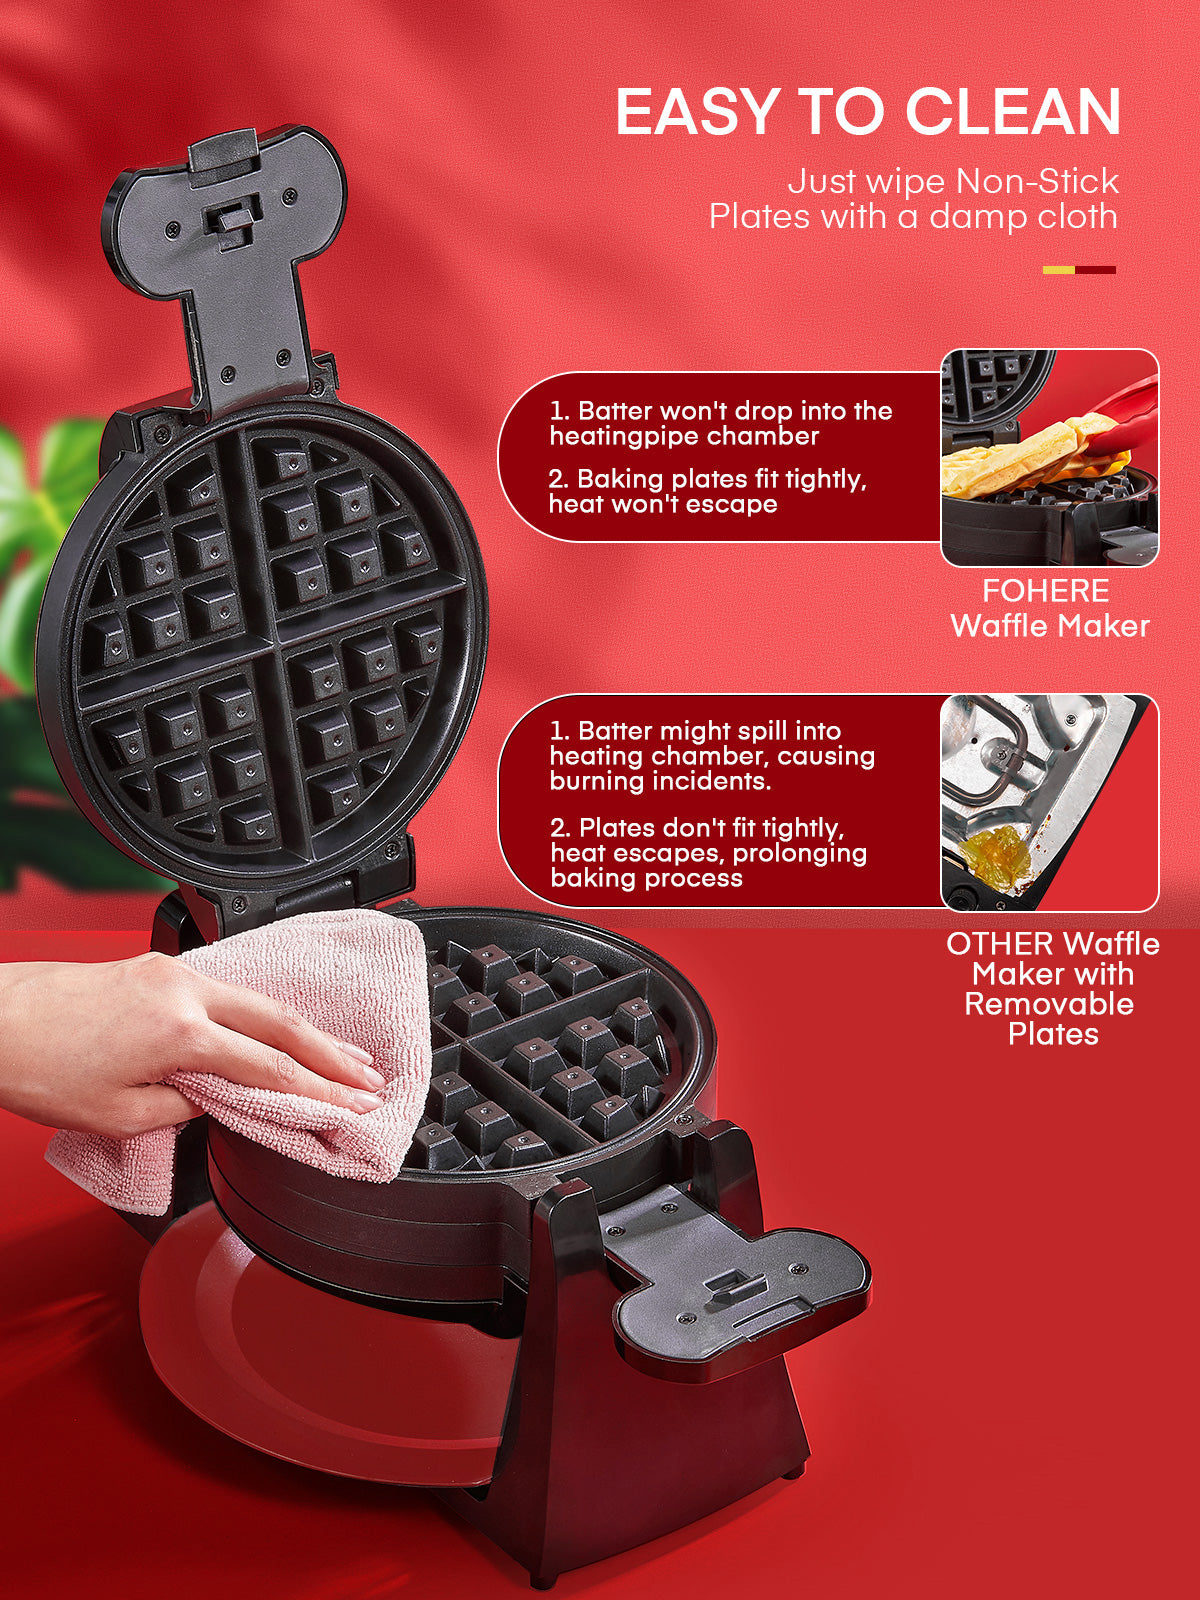 Waffle Maker, Belgian Waffle Maker Iron 180° Flip Double Waffle, 8 Slices, Rotating & Nonstick Plates, Removable Drip Tray, Cool Touch Handle, Red, 1400W